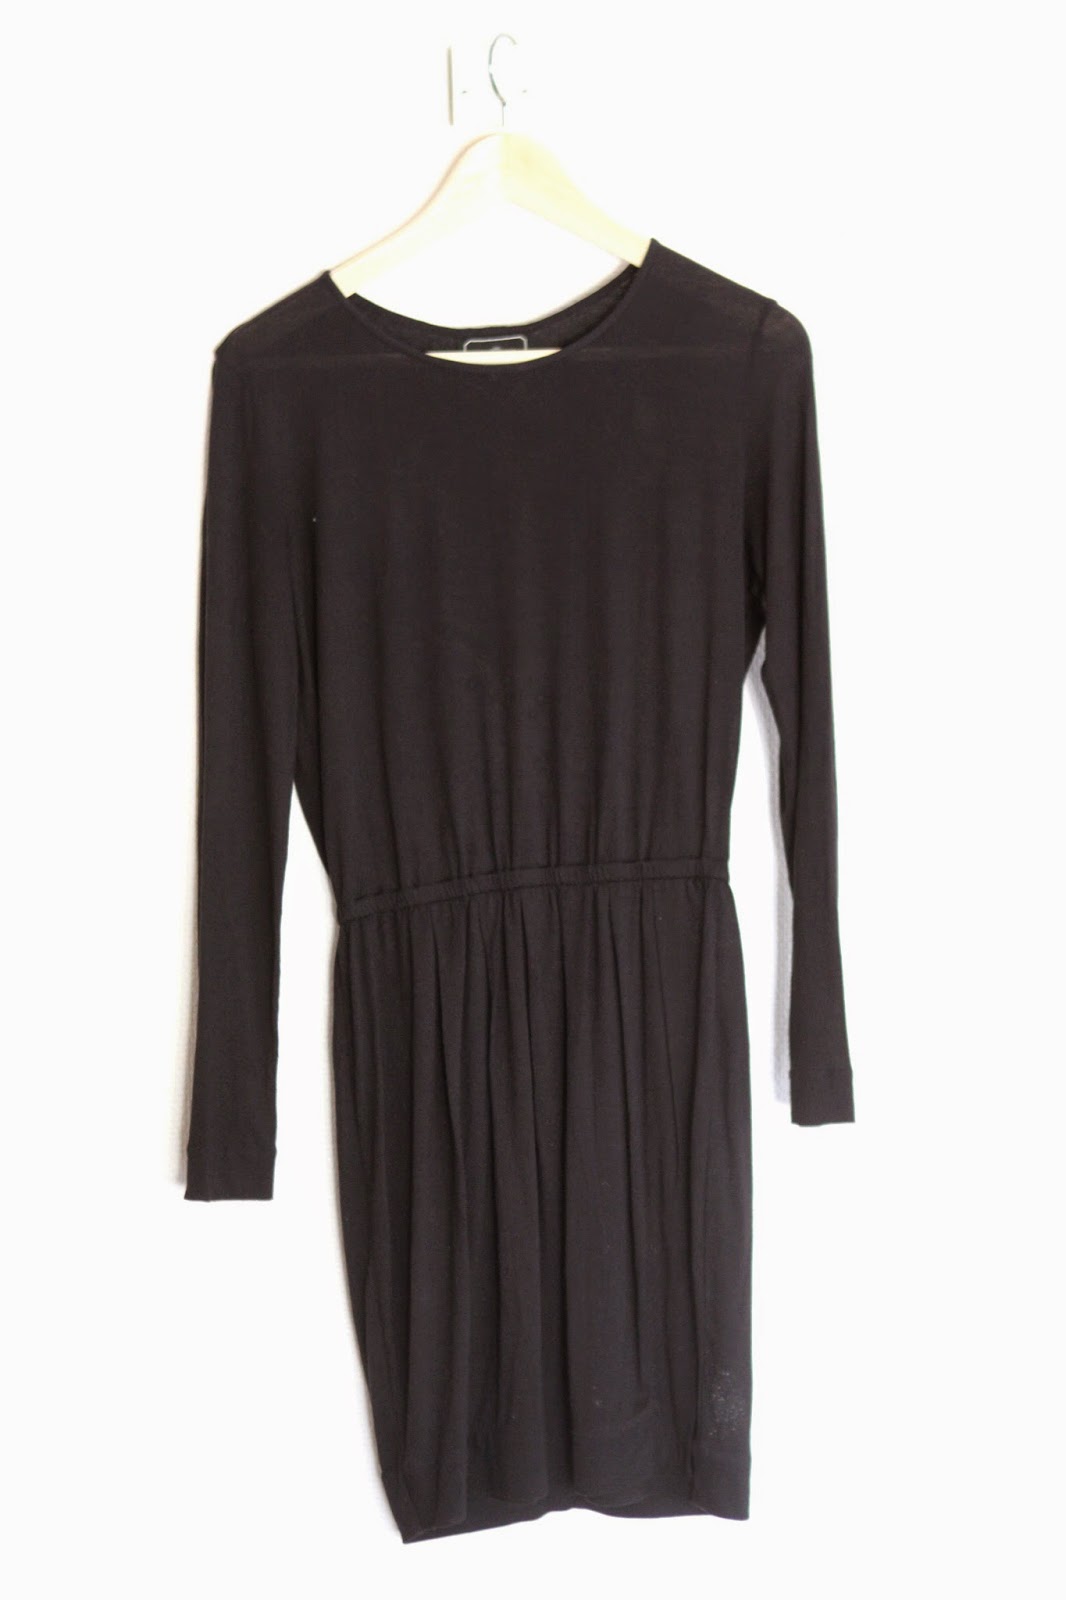 Stina's Vintage Store: ByMalene Birger dress with lace in the back